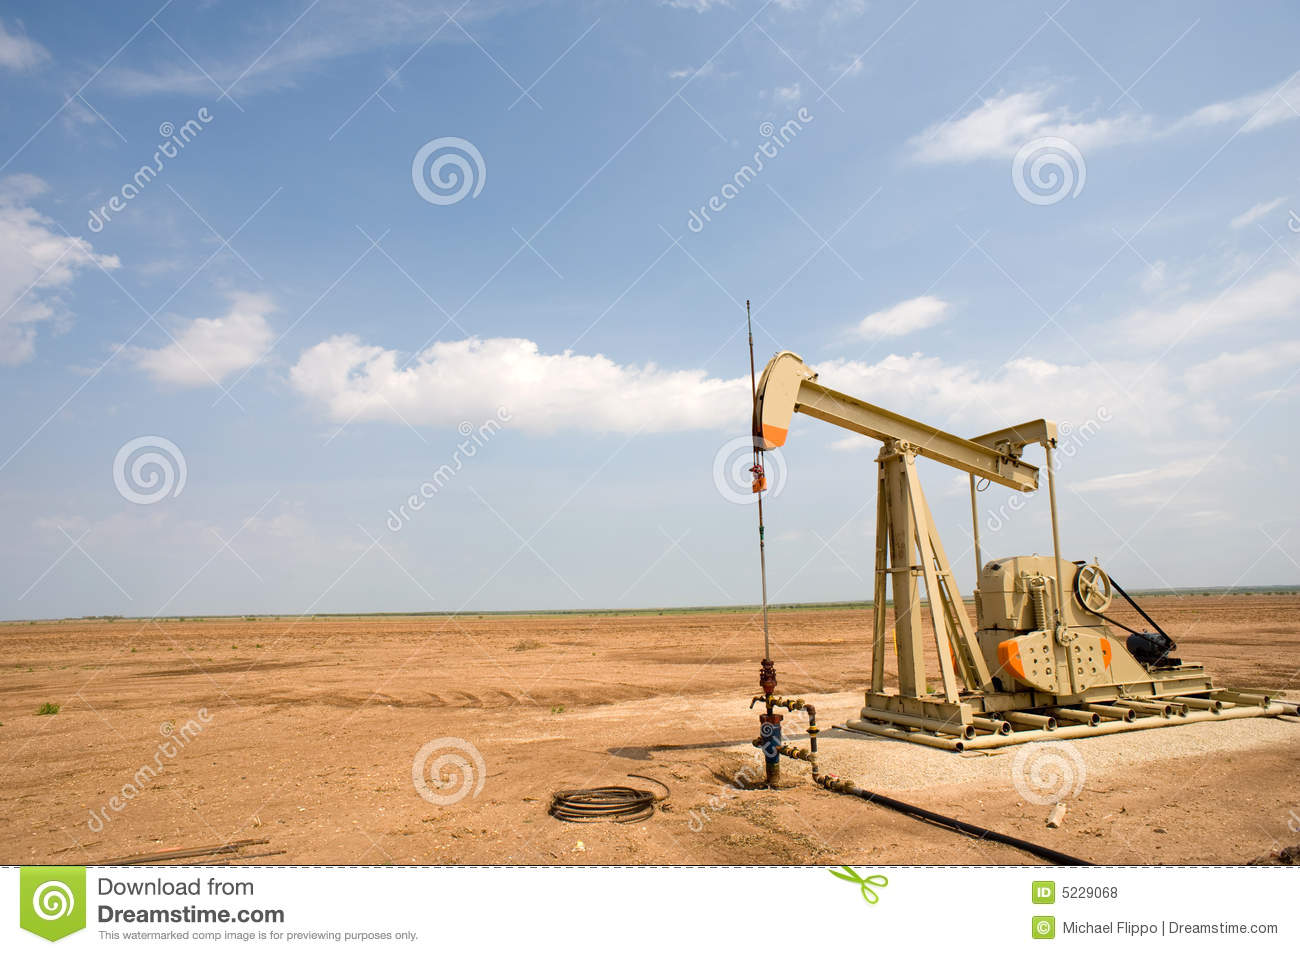     Or Pump Jack On The Plains Of West Texas United States Of America